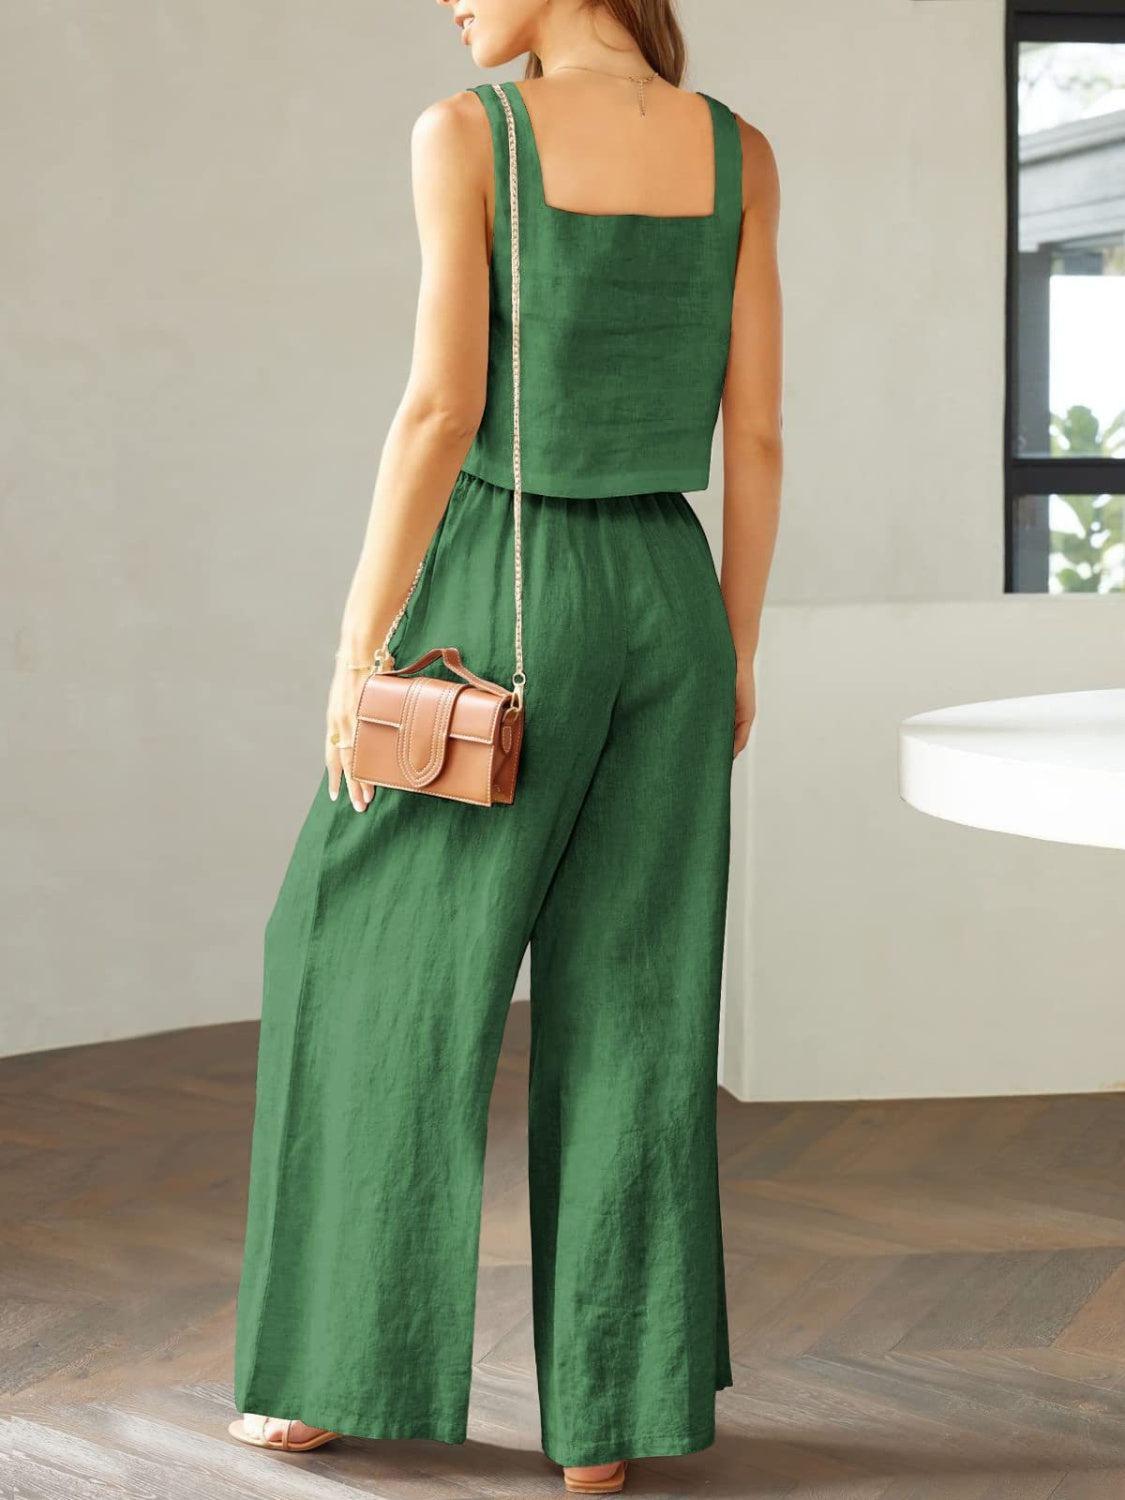 a woman in a green jumpsuit with a handbag